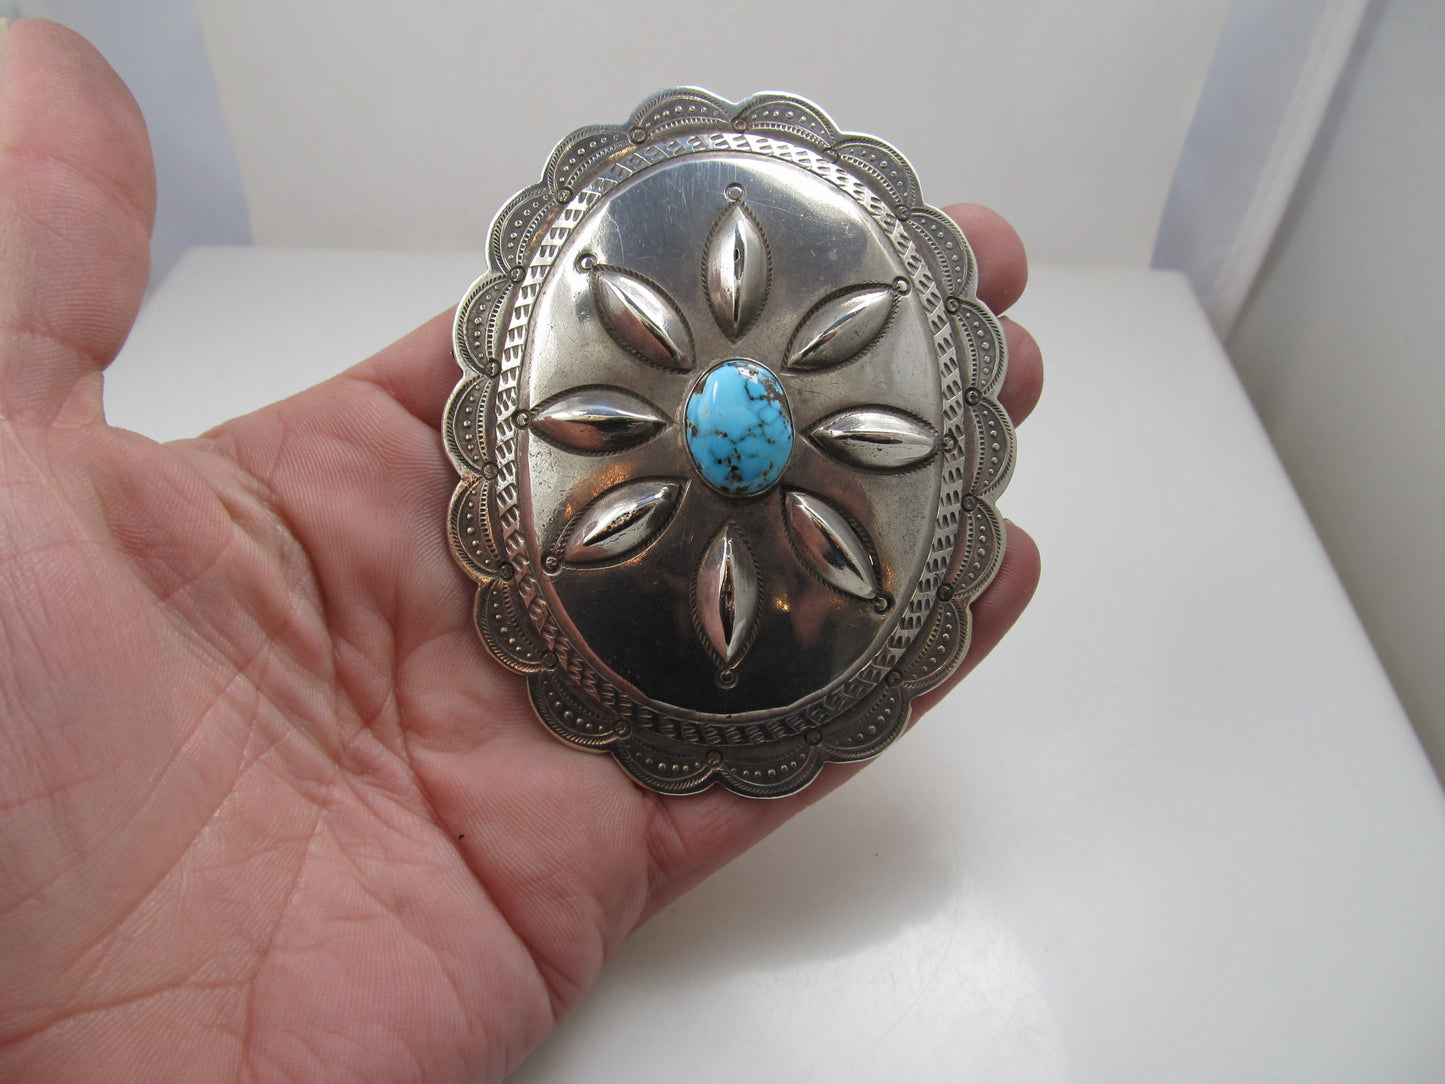 Large antique sterling silver turquoise concho pin/pendant